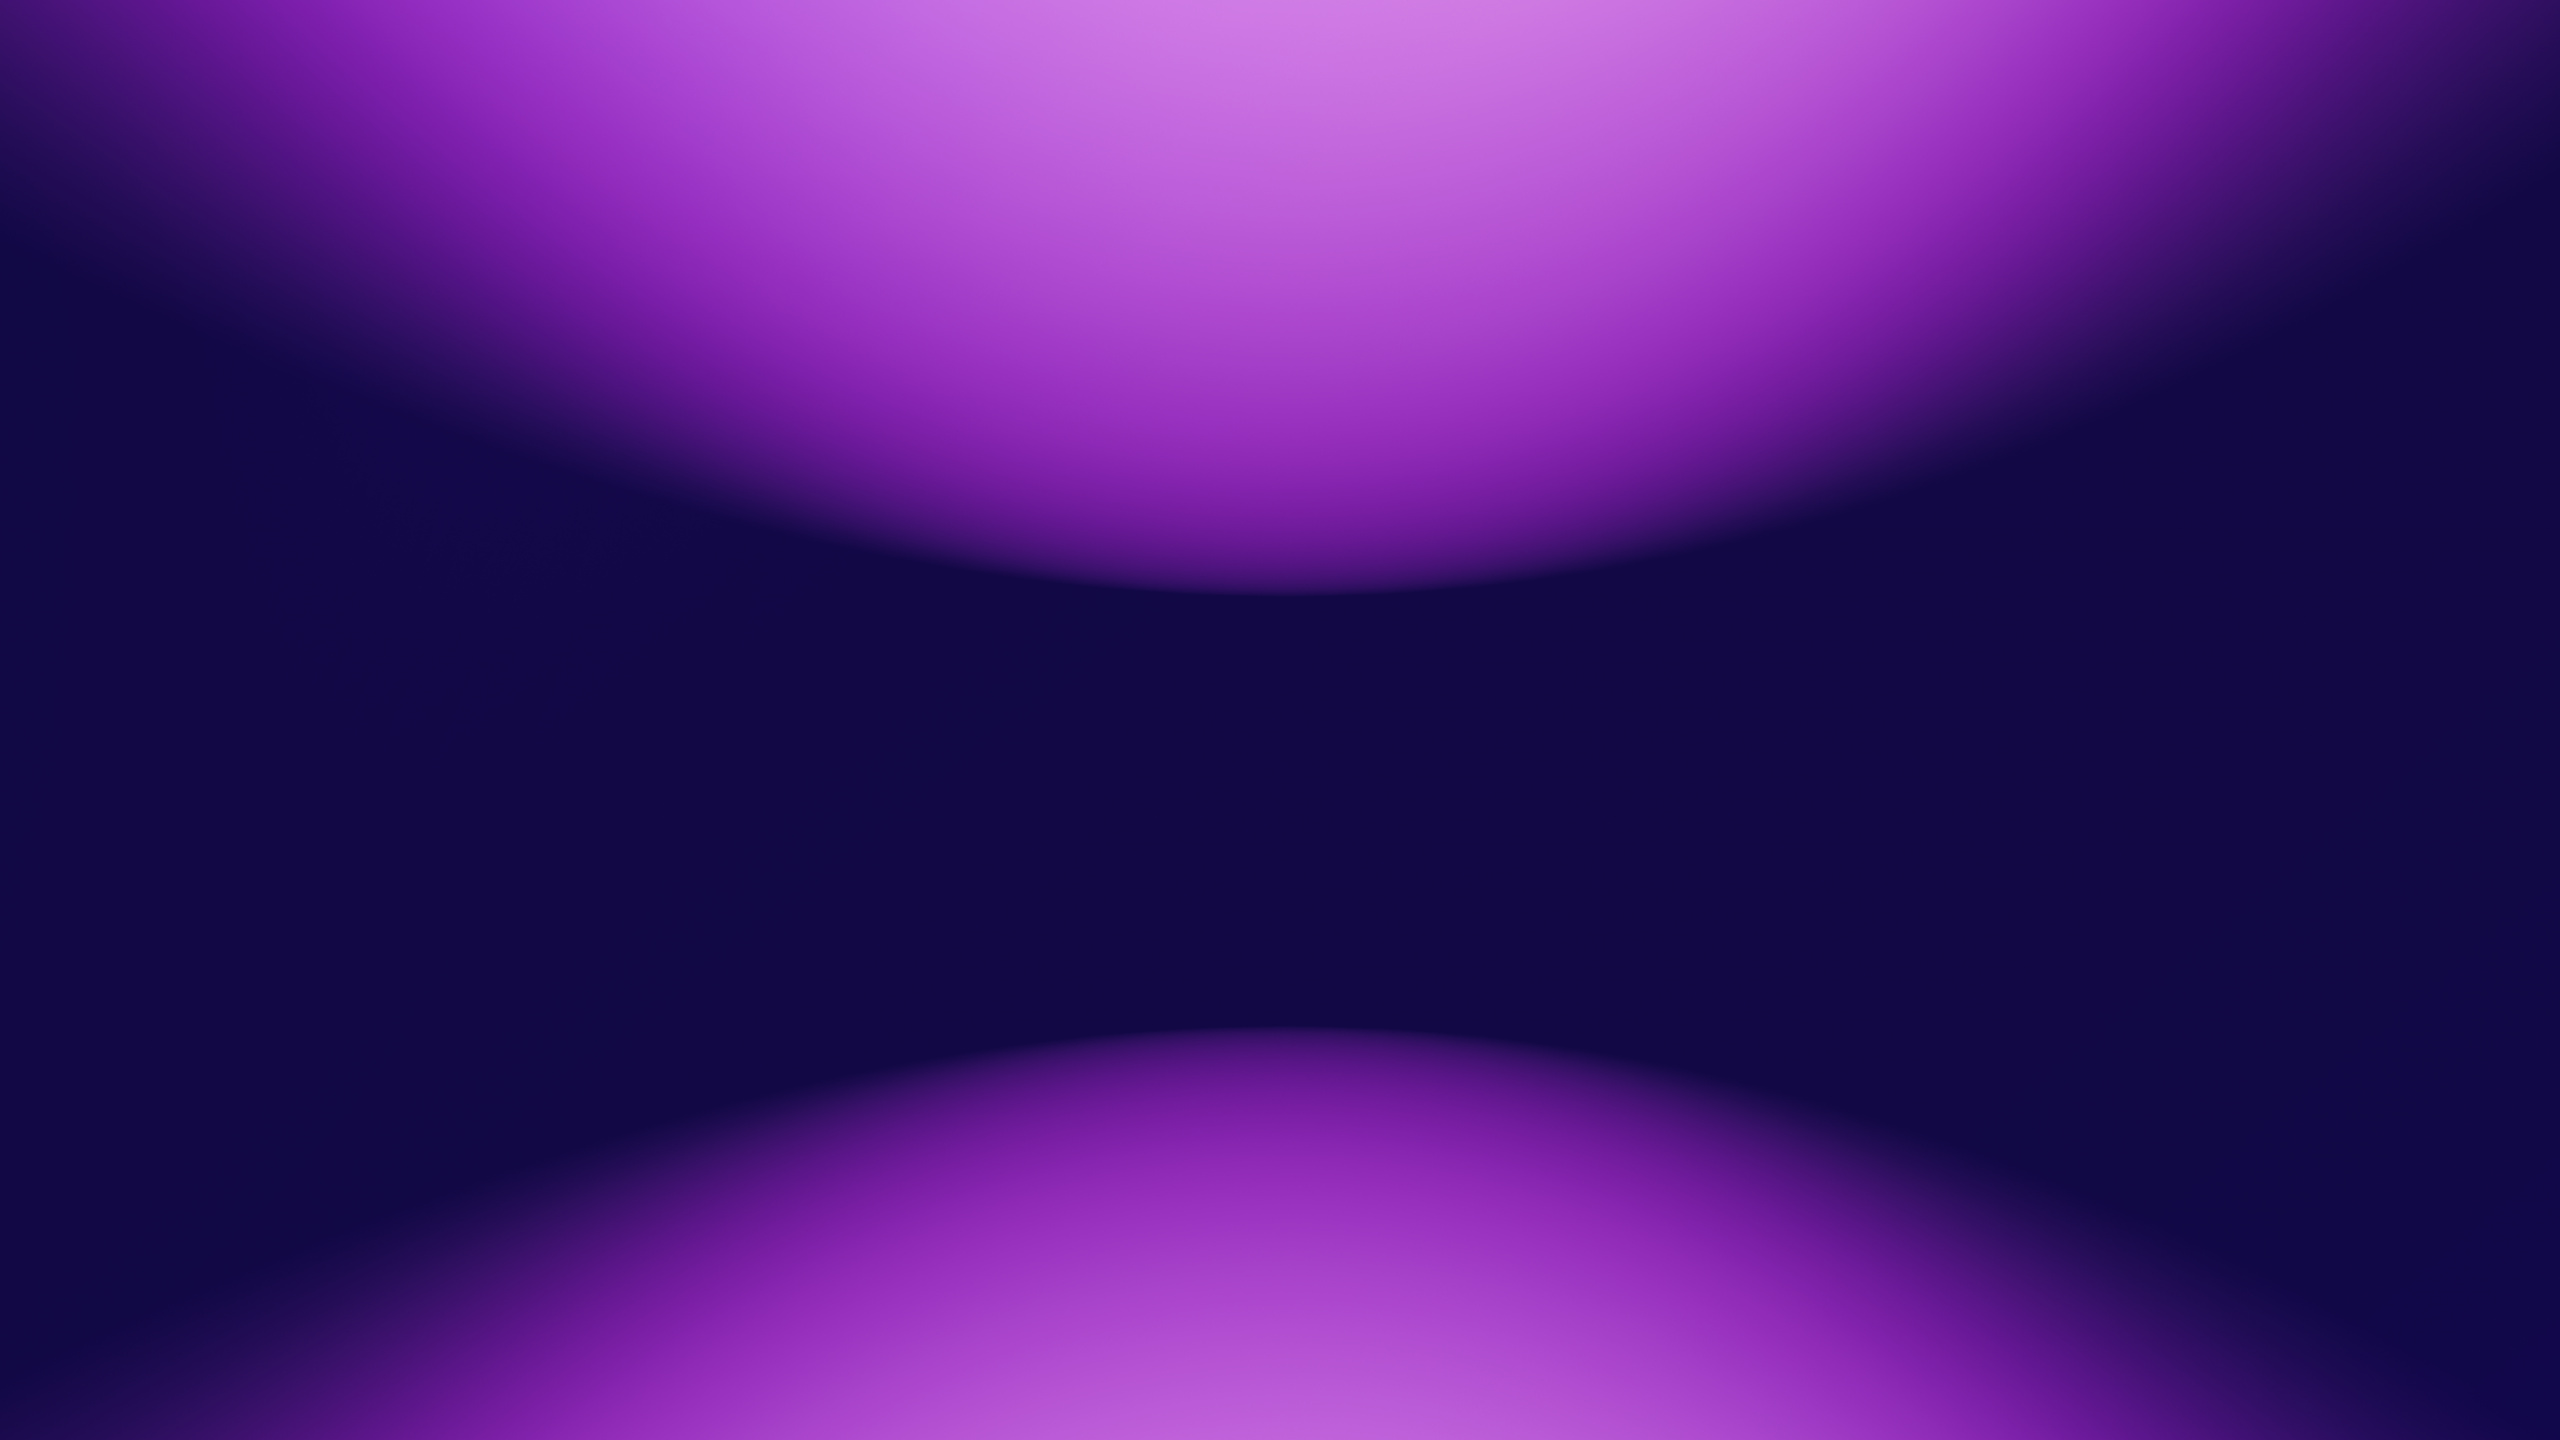 Circle, Apples, Ios, Colorfulness, Purple. Wallpaper in 2560x1440 Resolution